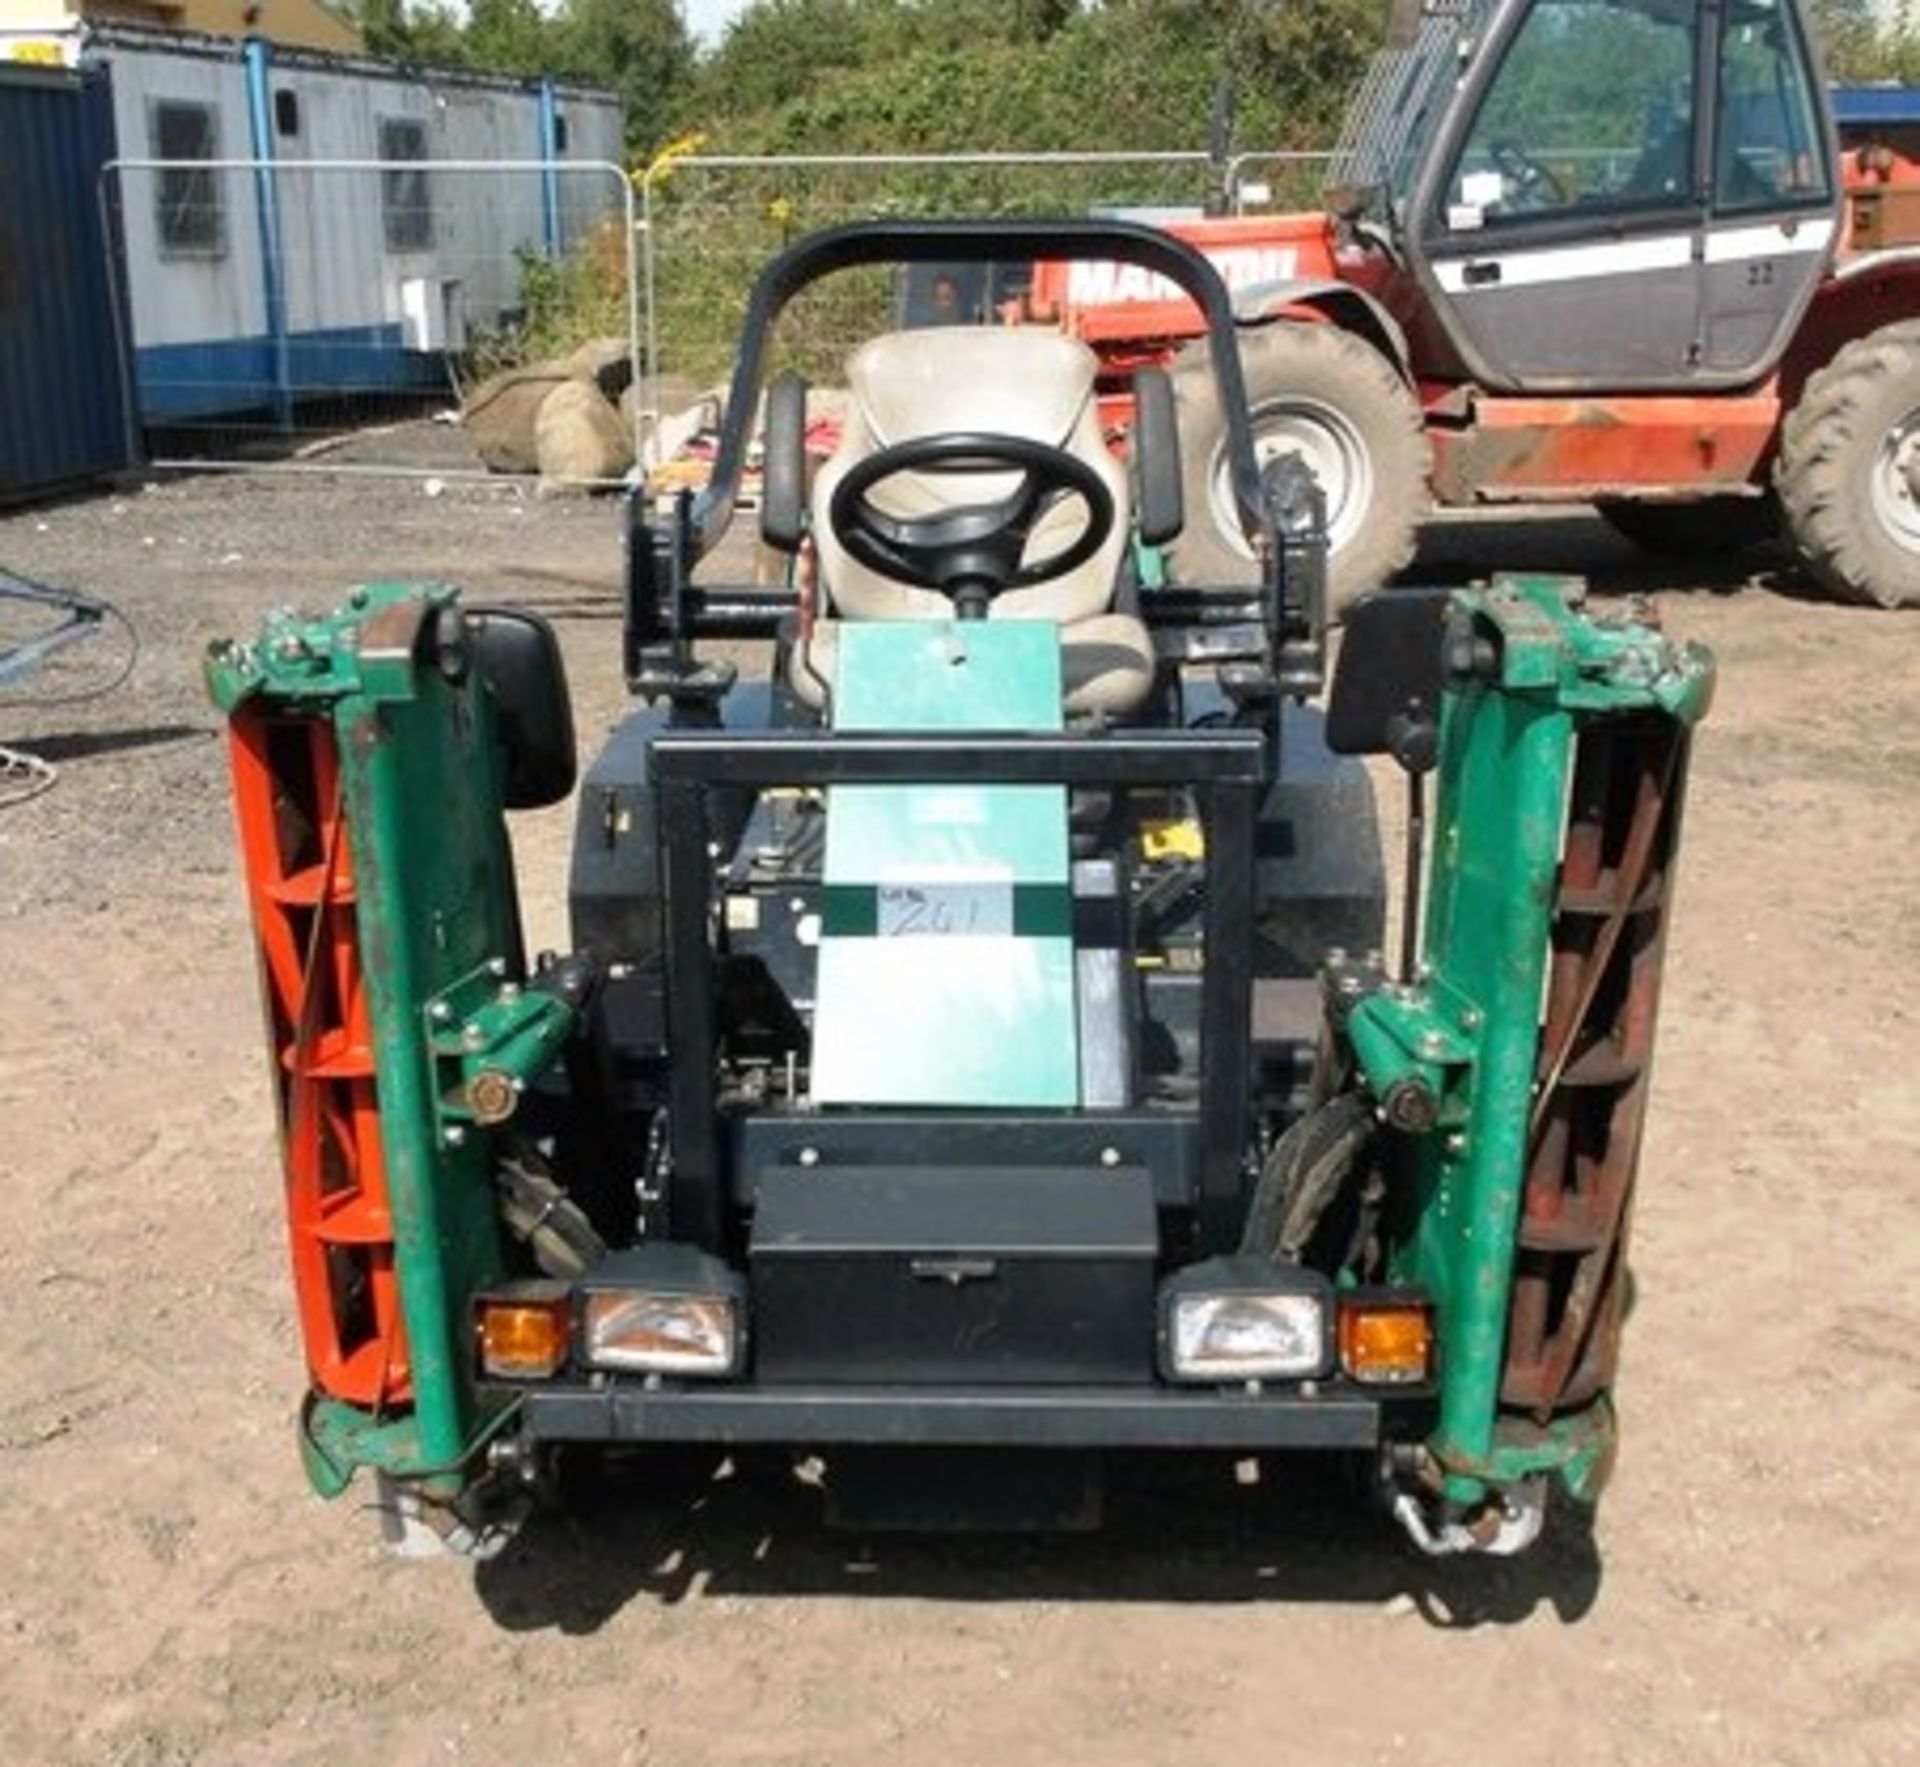 RANSOMES HIGHWAY 2130 MOWER, 5430 HOURS, SN CU000659, FT NO 3250 DOCUMENTS IN OFFICE